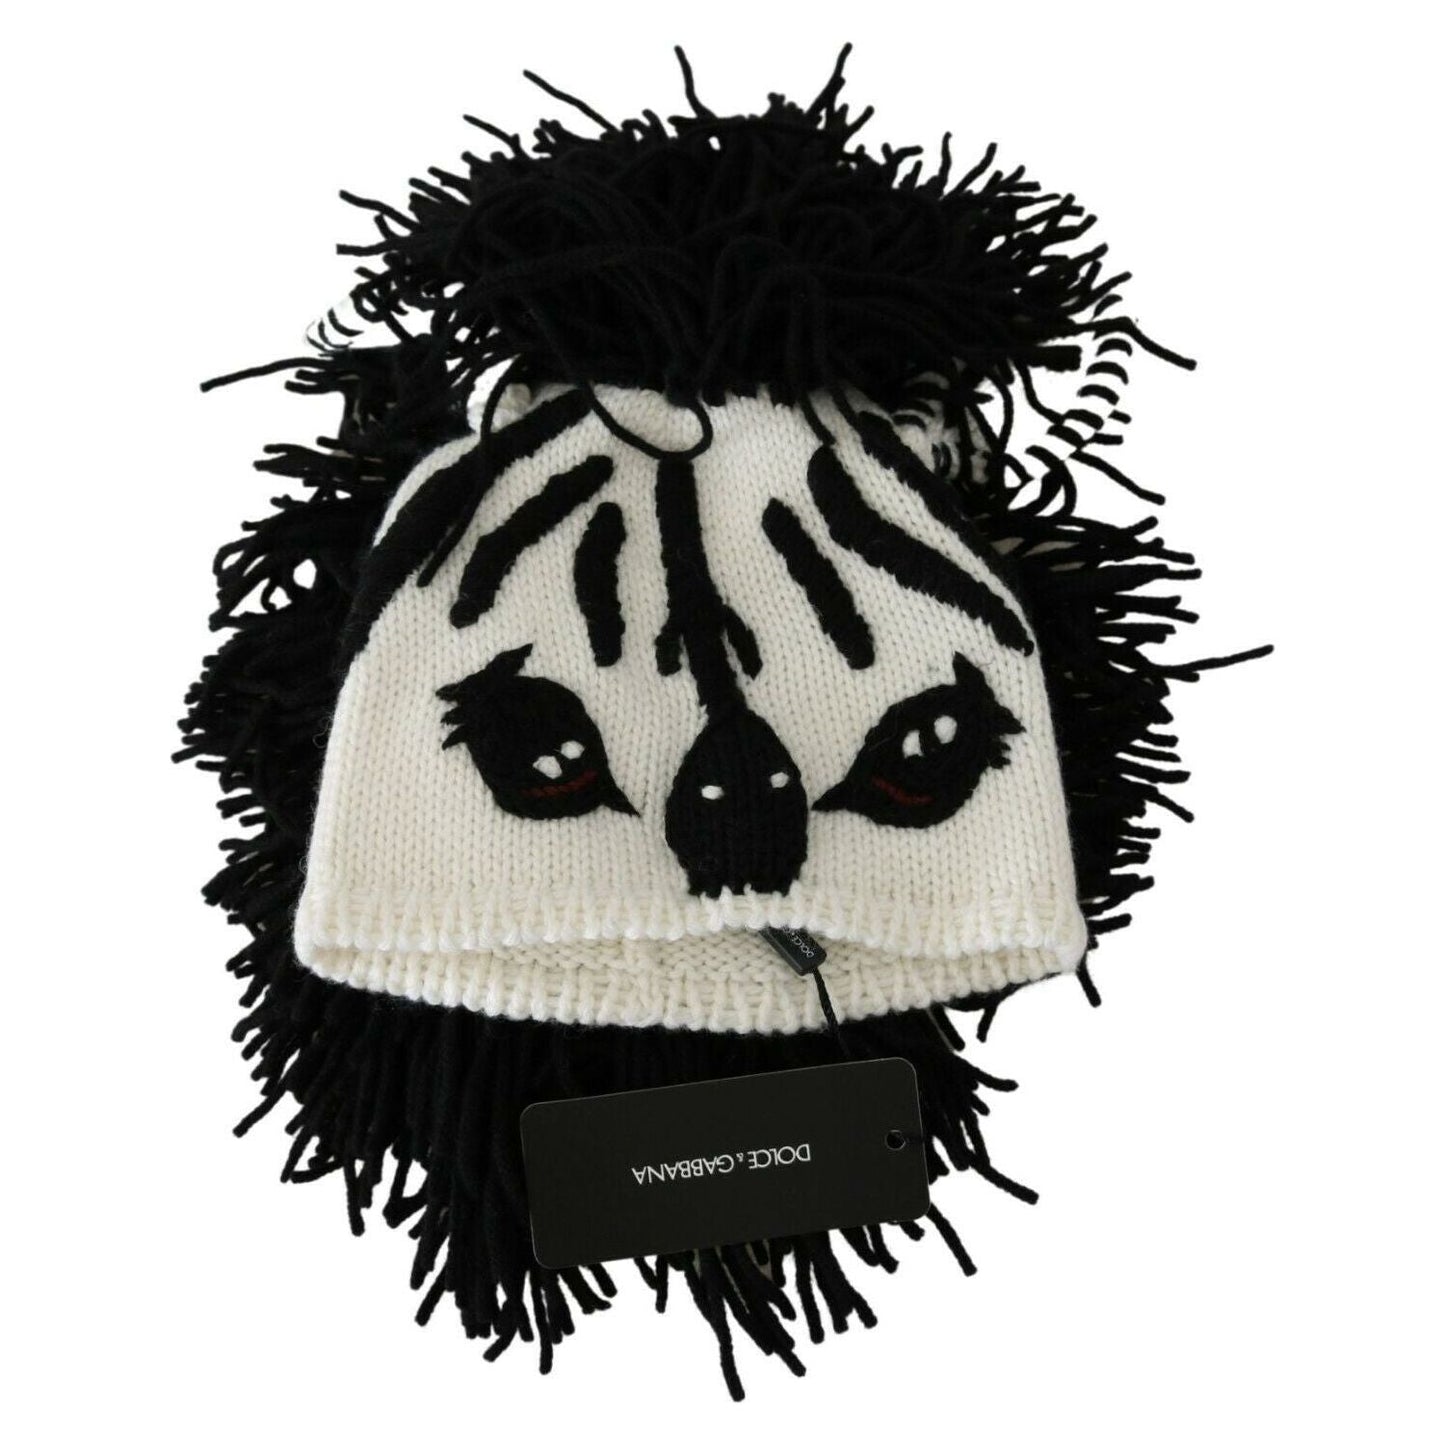 Dolce & Gabbana Black and White Knitted Cashmere Beanie black-white-knitted-cashmere-animal-design-hat WOMAN HATS s-l1600-43-d02e9ce9-55d.jpg